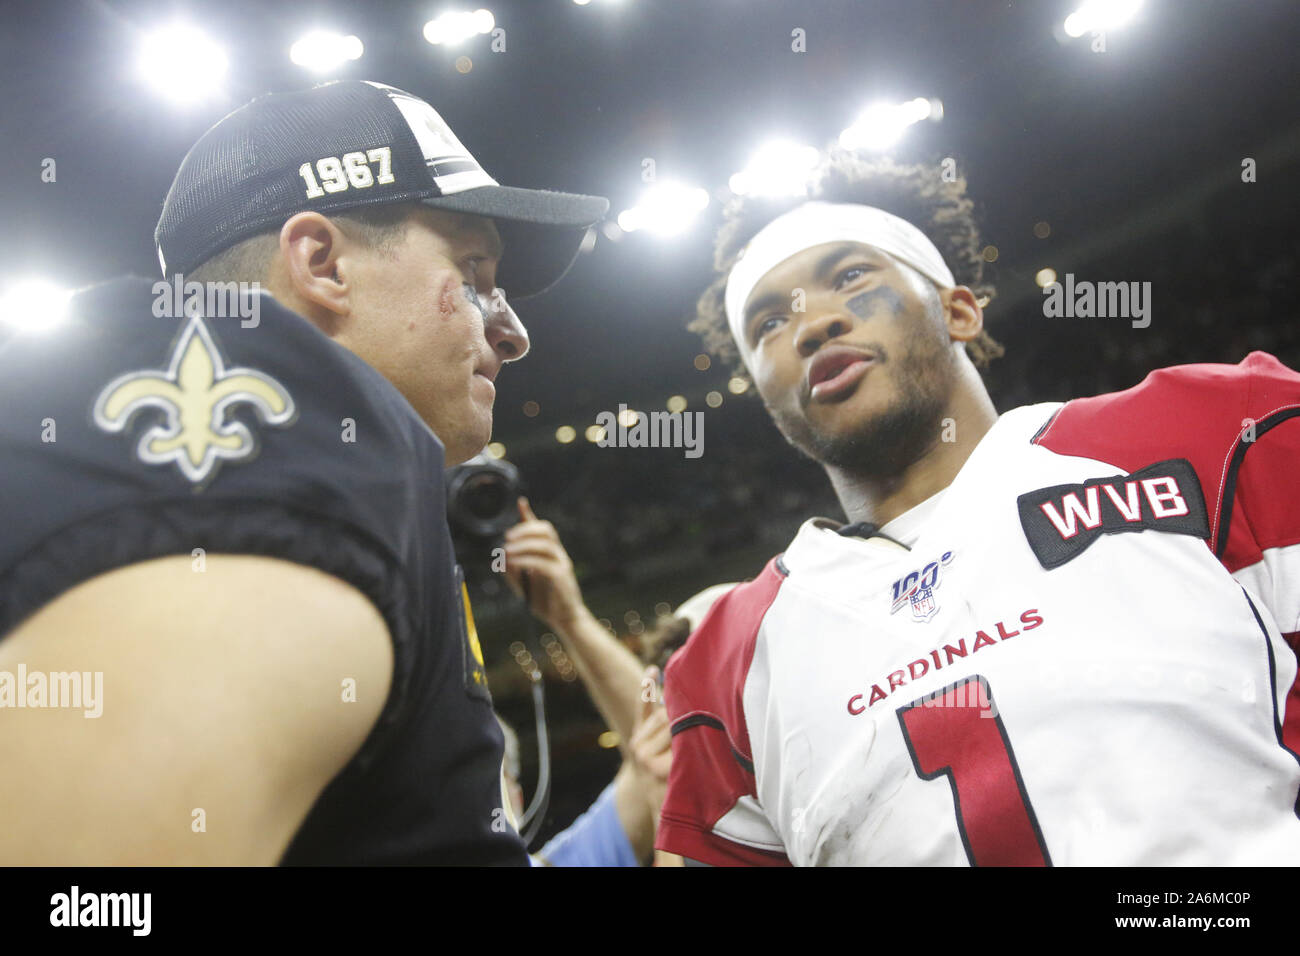 New Orleans, LOUISIANA, USA. 27th Oct, 2019. (left to right) New Orleans Saints quarterback Drew Brees and Arizona Cardinals quarterback Kyler Murray talk on the field after their game in New Orleans, Louisiana USA on October 27, 2019. The Saints beat the Cardinals 31-9. Credit: Dan Anderson/ZUMA Wire/Alamy Live News Stock Photo